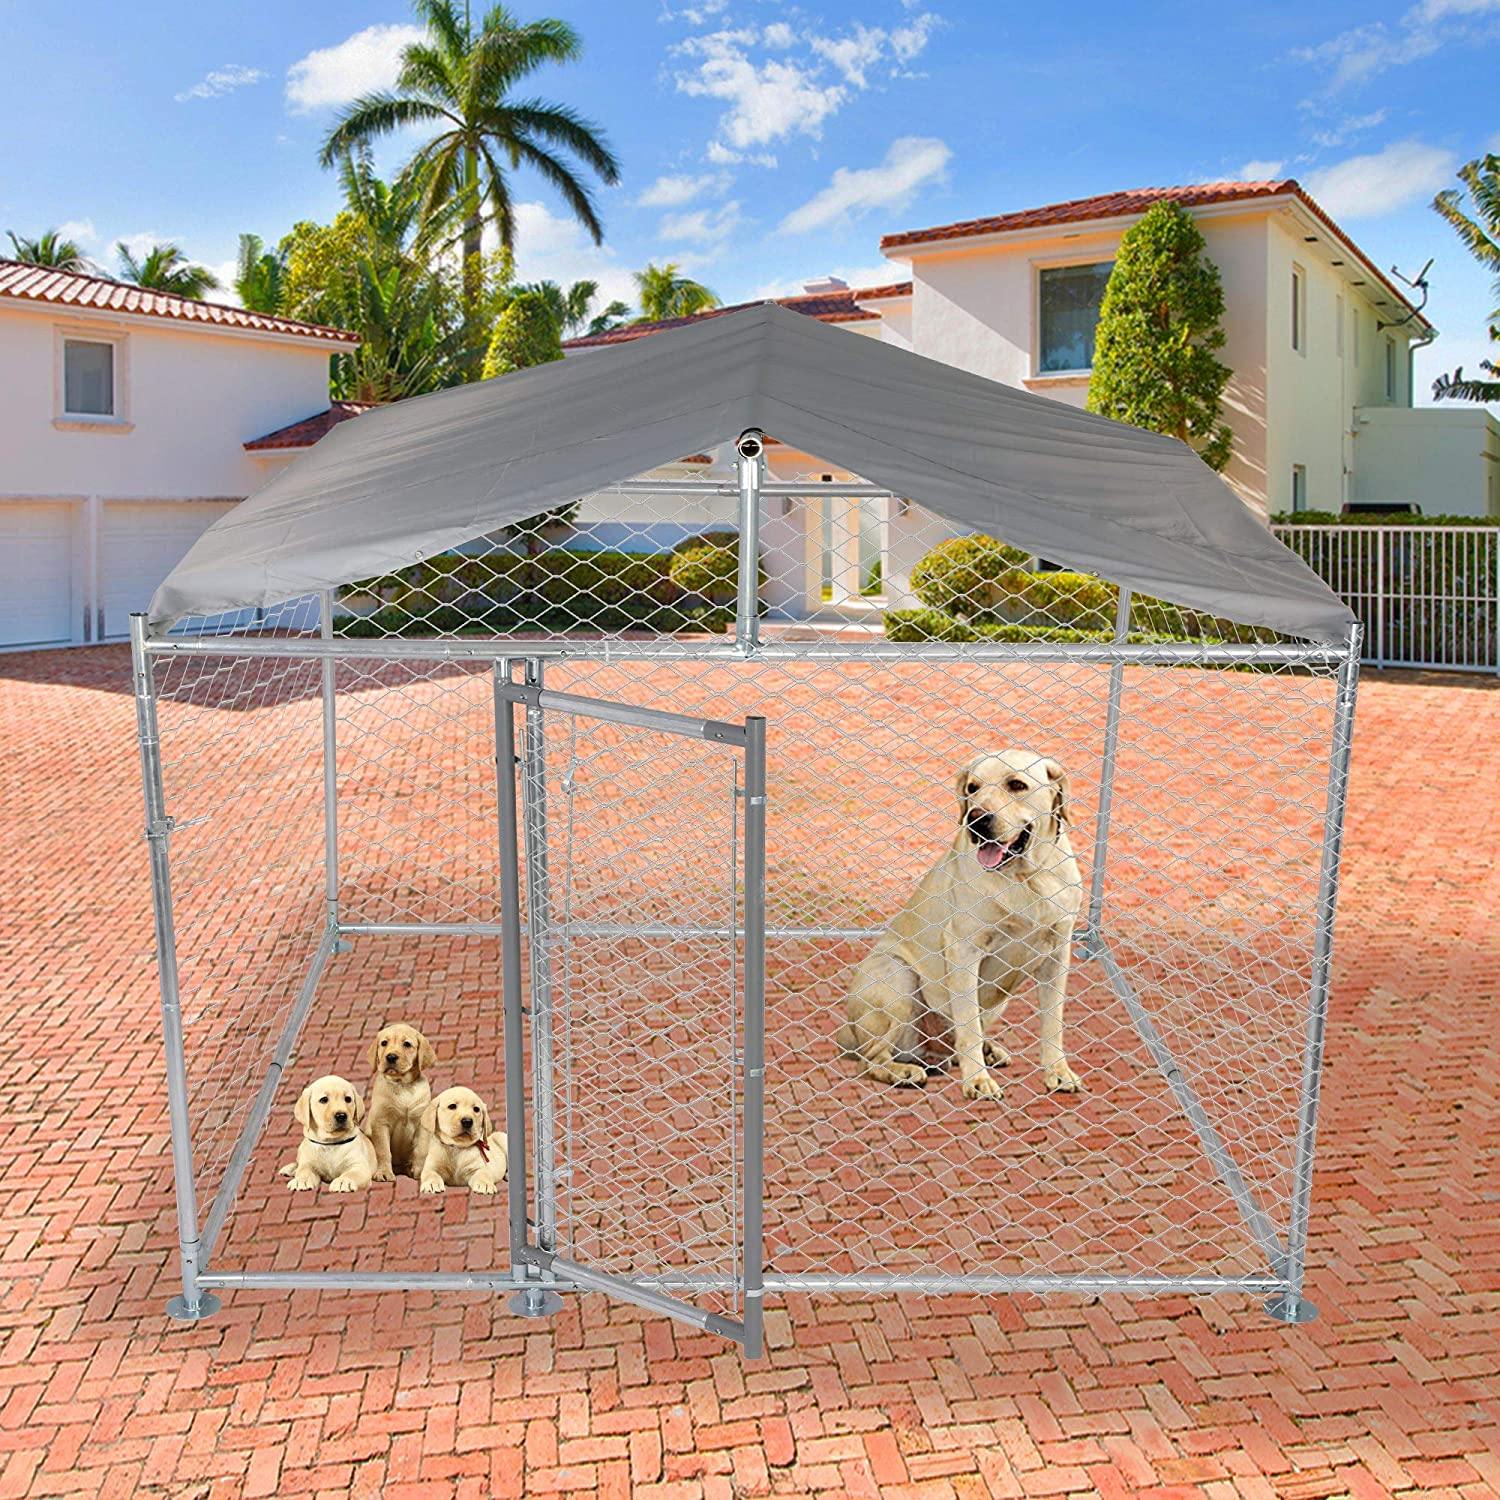 Outdoor Metal Dog Playpen For Your Puppy, Exercise Pens For Puppies, Chain Link Dog Kennel, 6.5' x 6.5' x 5' - Bosonshop